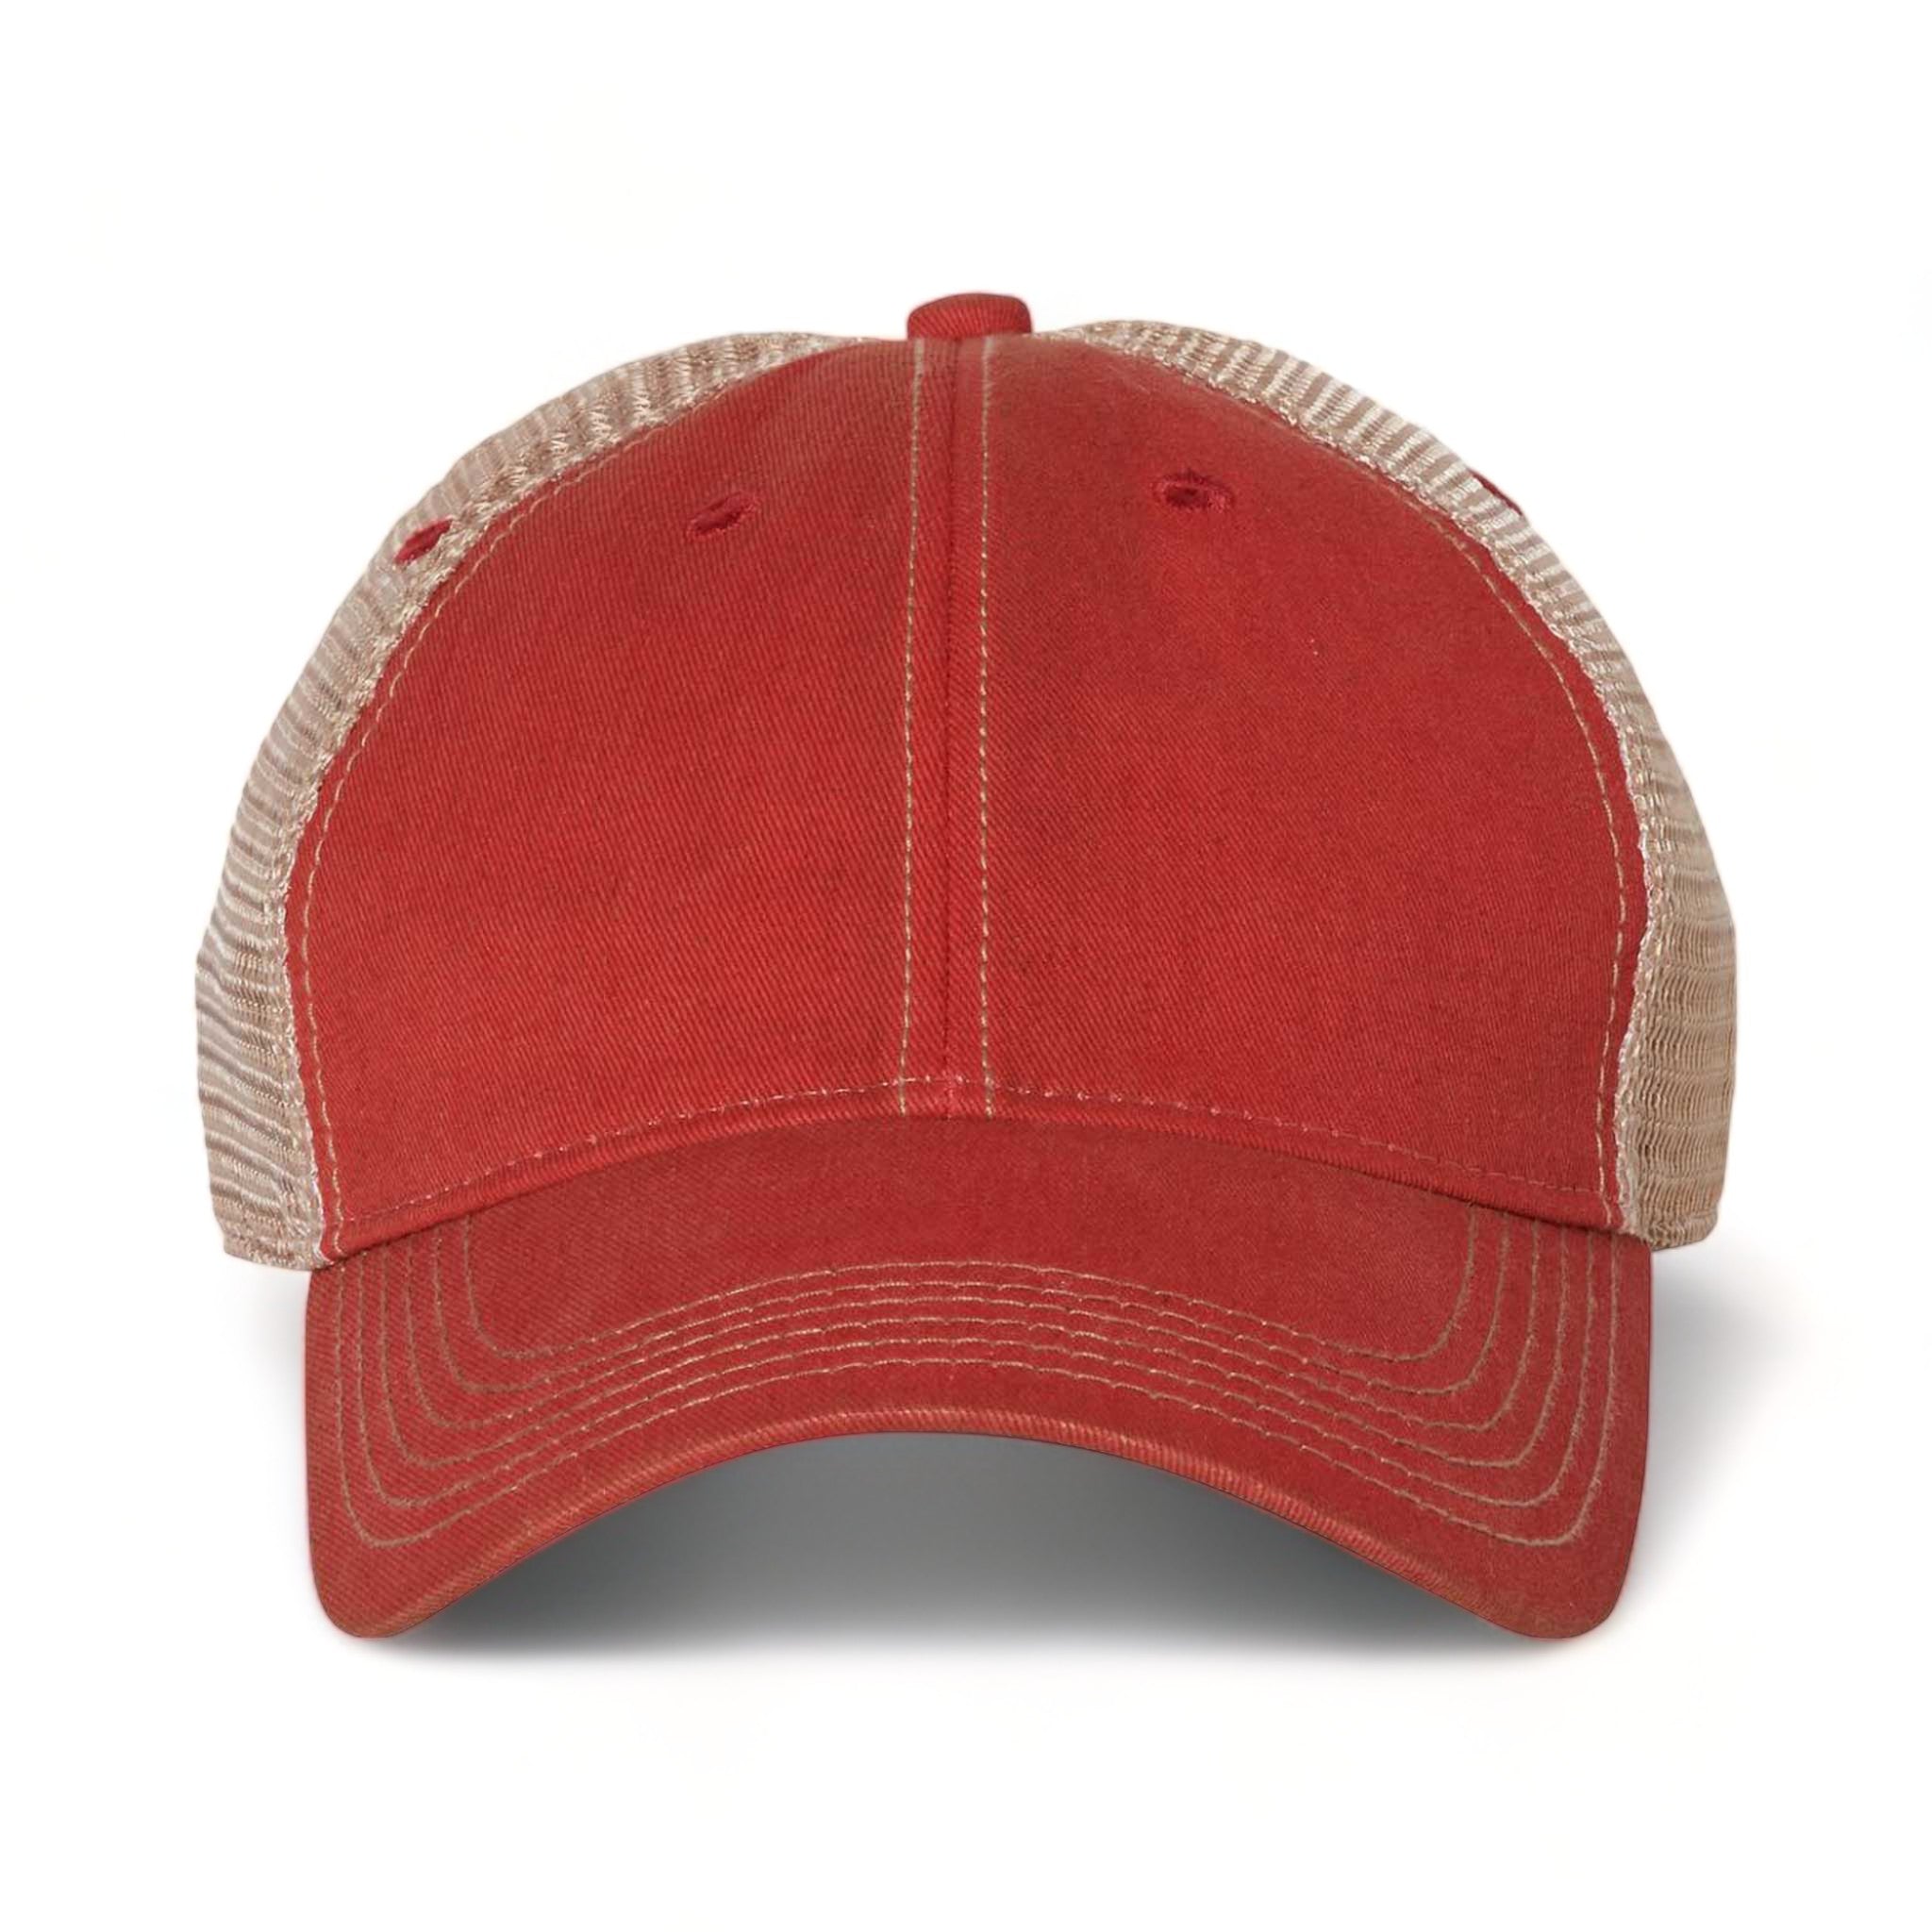 Front view of LEGACY OFA custom hat in scarlet red and khaki